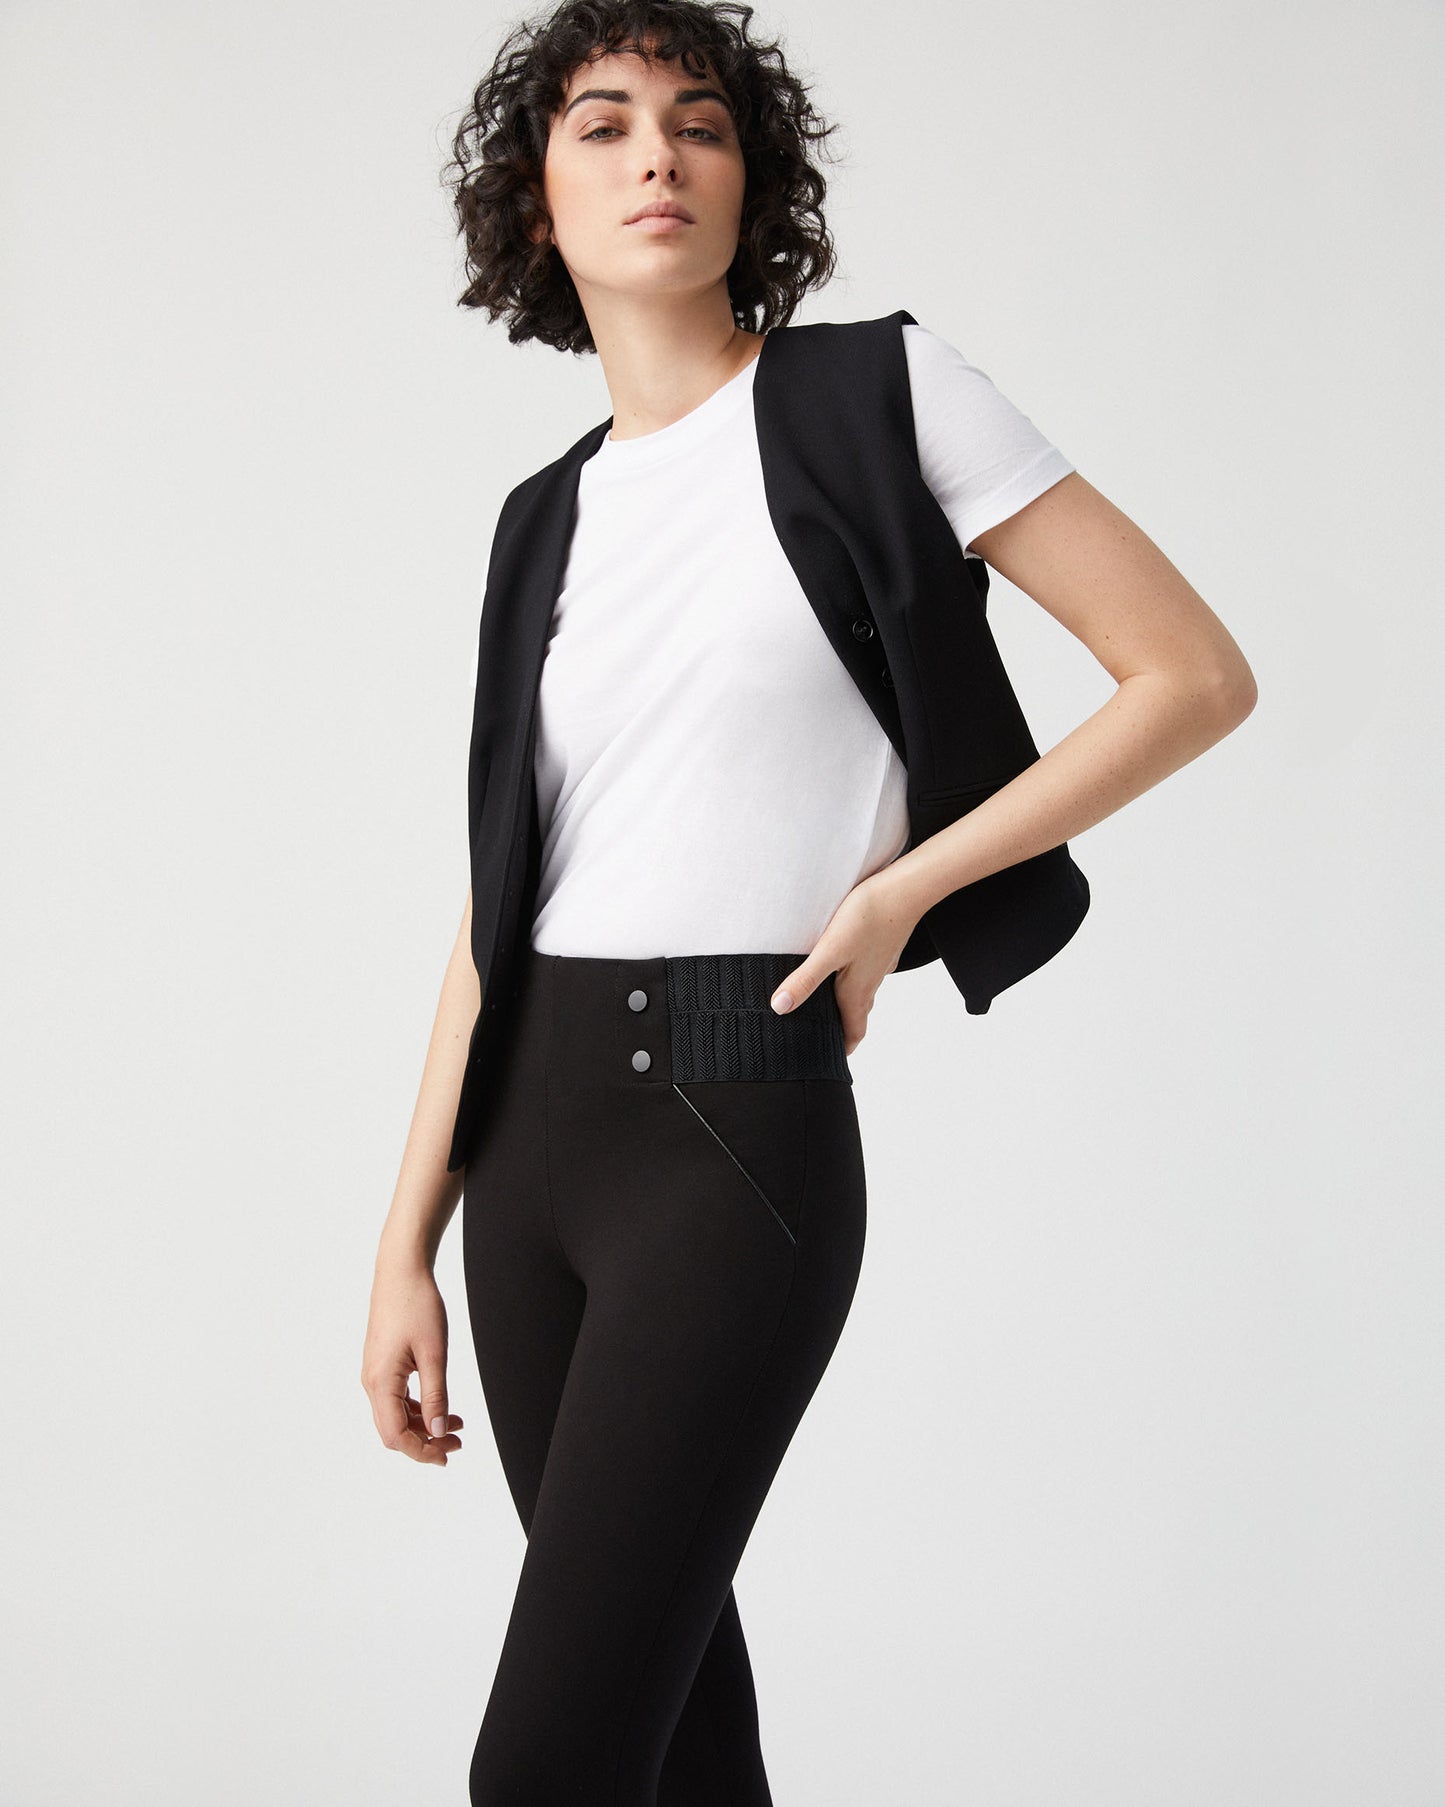 Ysabel Mora 70152 Leggings - High waisted trouser leggings with black faux buttons on the sides and deep ribbed textured elasticated slimming waistband.